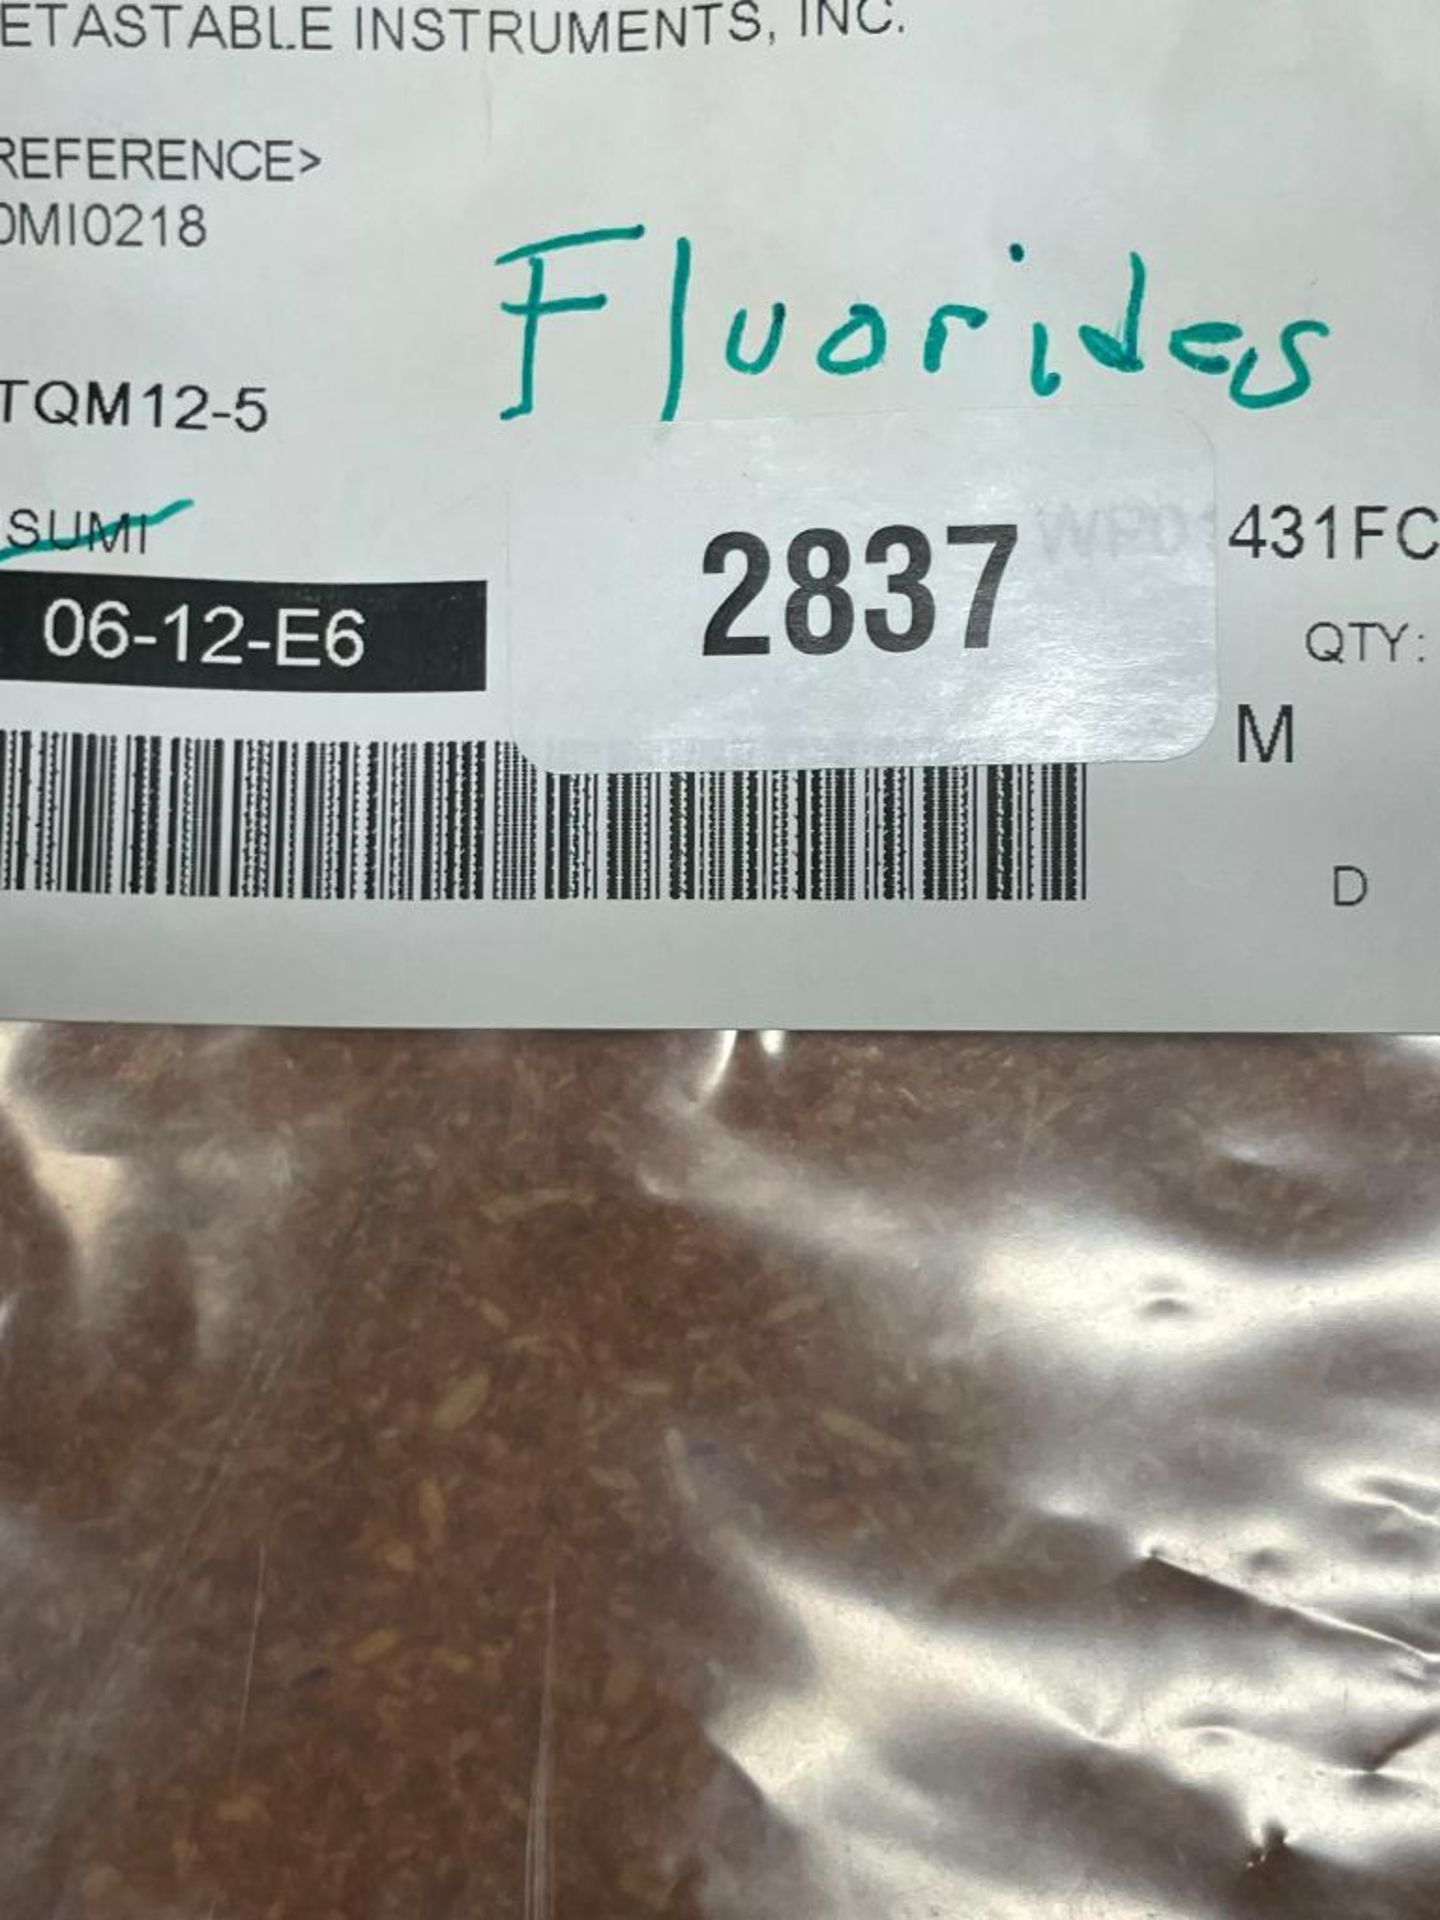 (5) FLUORIDE GLASS SAMPLES BRAND/MODEL: LE VERRE FLUORE INFORMATION: (3)-IFG GLASS, 10X10X3.5mm; (2) - Image 3 of 3